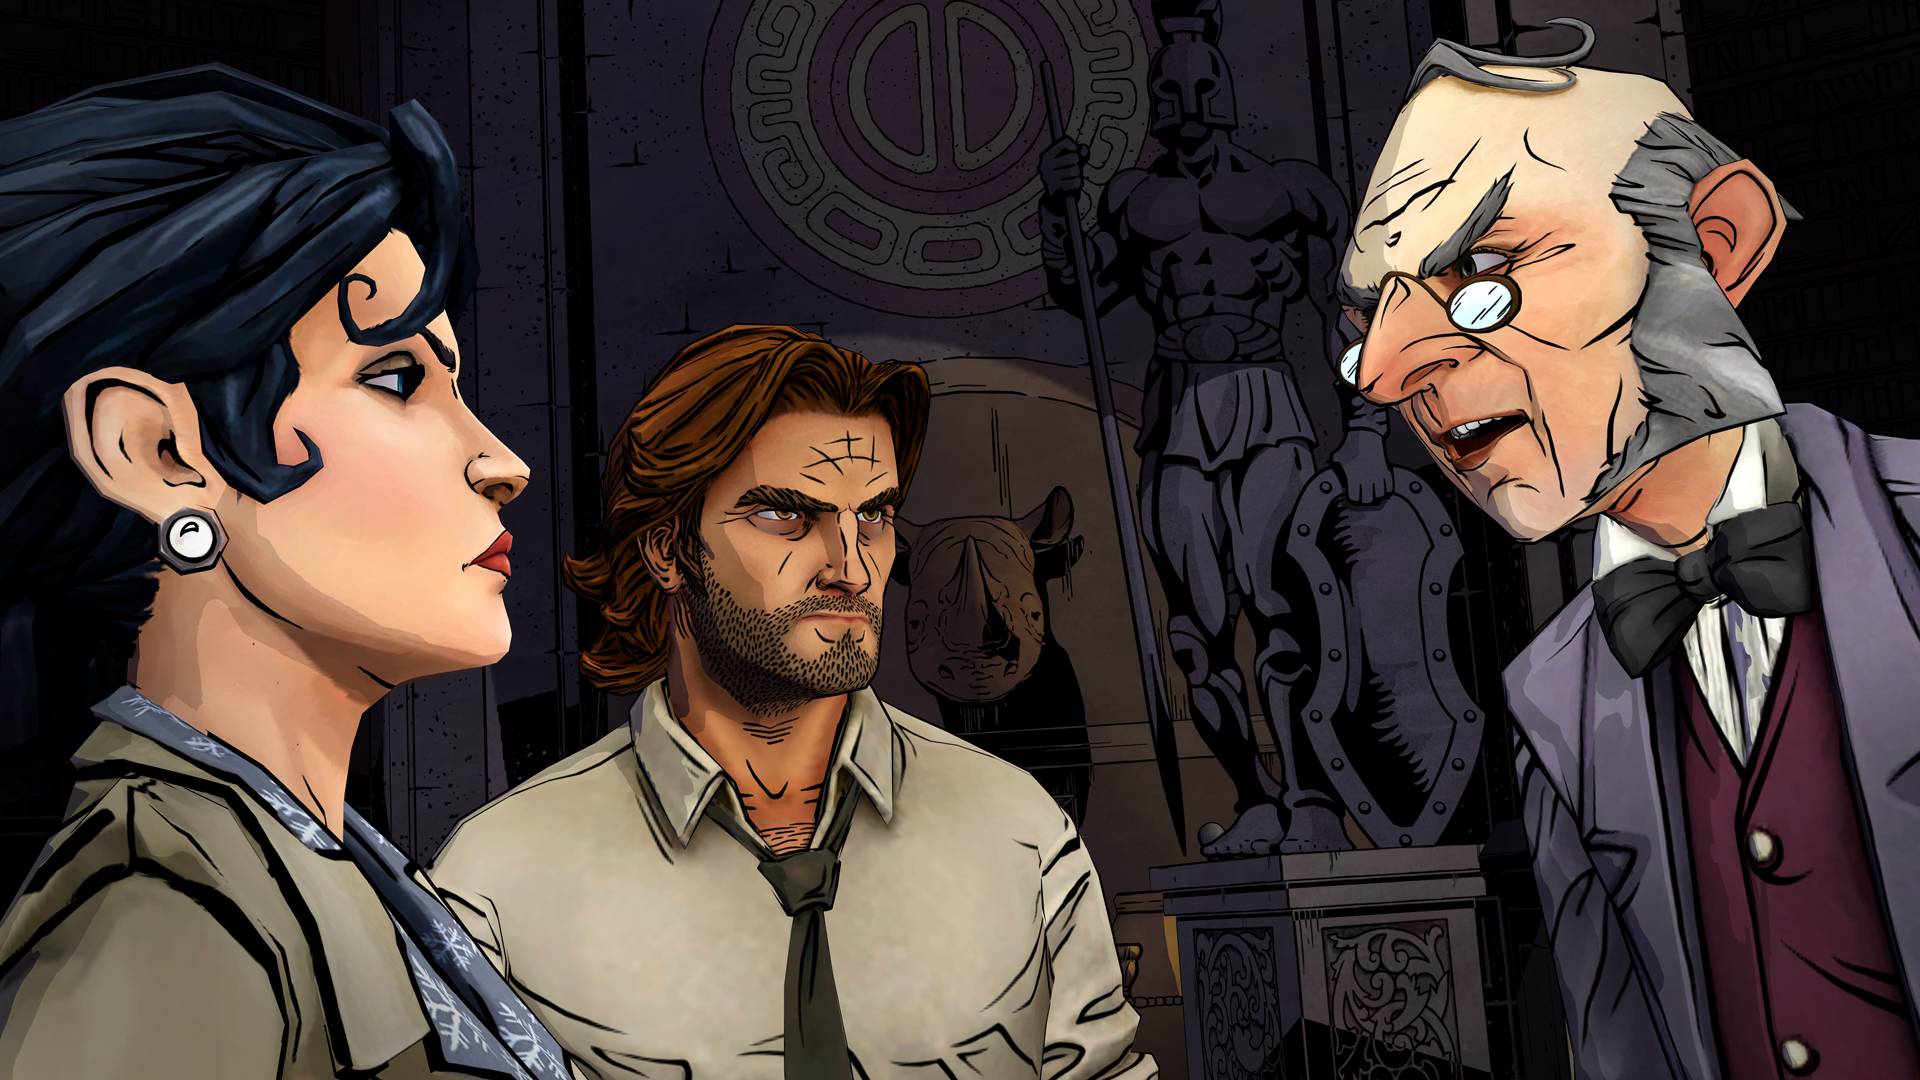 We will see a new Wolf Among Us 2 trailer this week